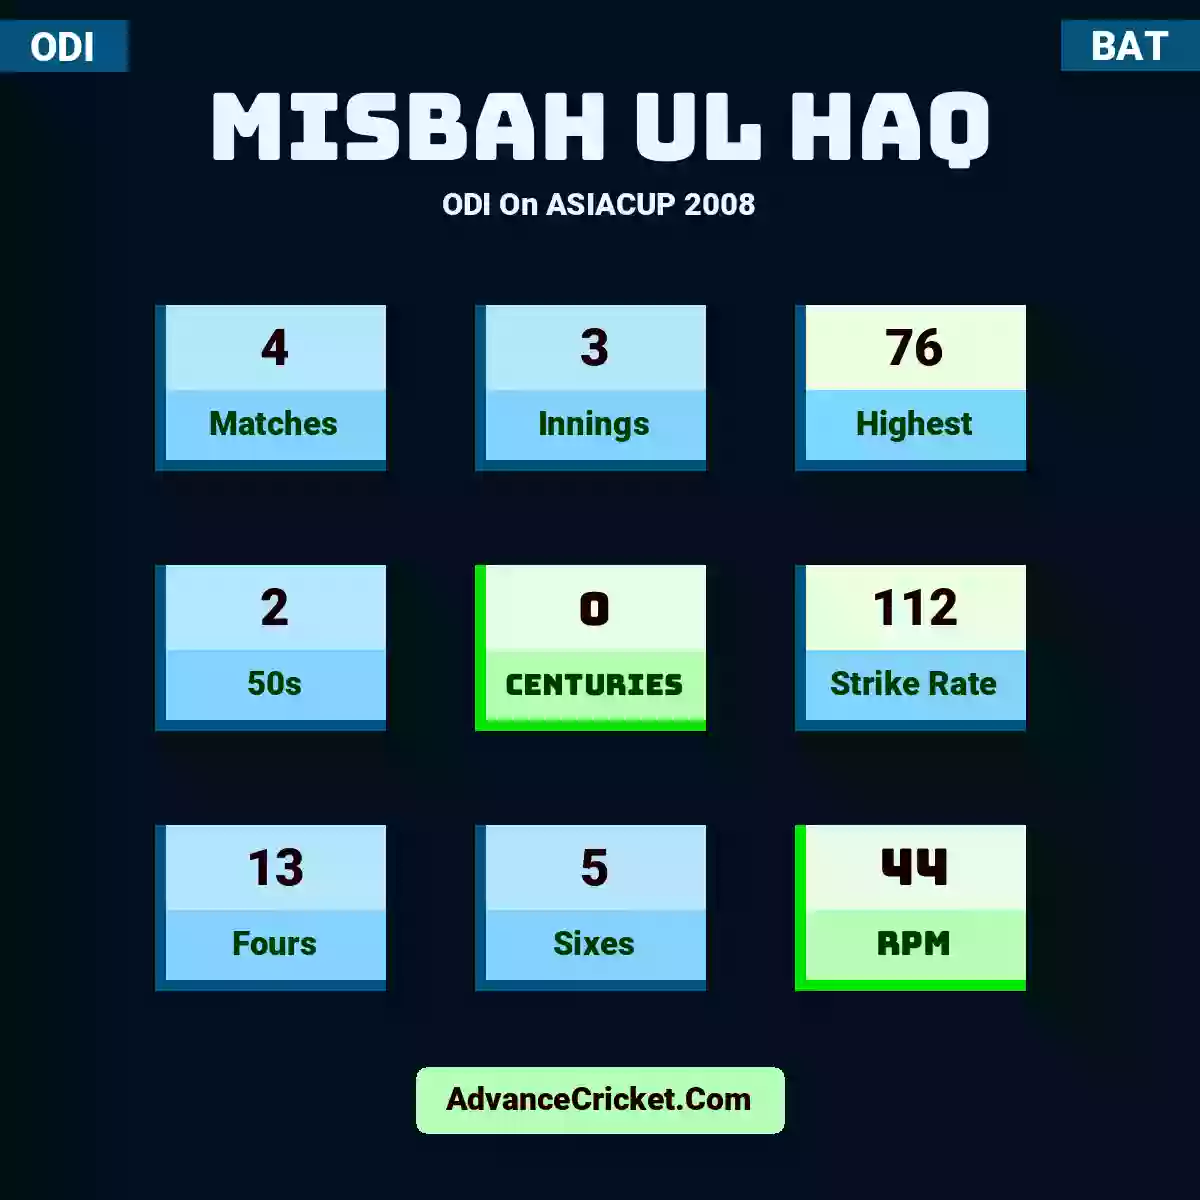 Misbah ul Haq ODI  On ASIACUP 2008, Misbah ul Haq played 4 matches, scored 76 runs as highest, 2 half-centuries, and 0 centuries, with a strike rate of 112. M.Haq hit 13 fours and 5 sixes, with an RPM of 44.